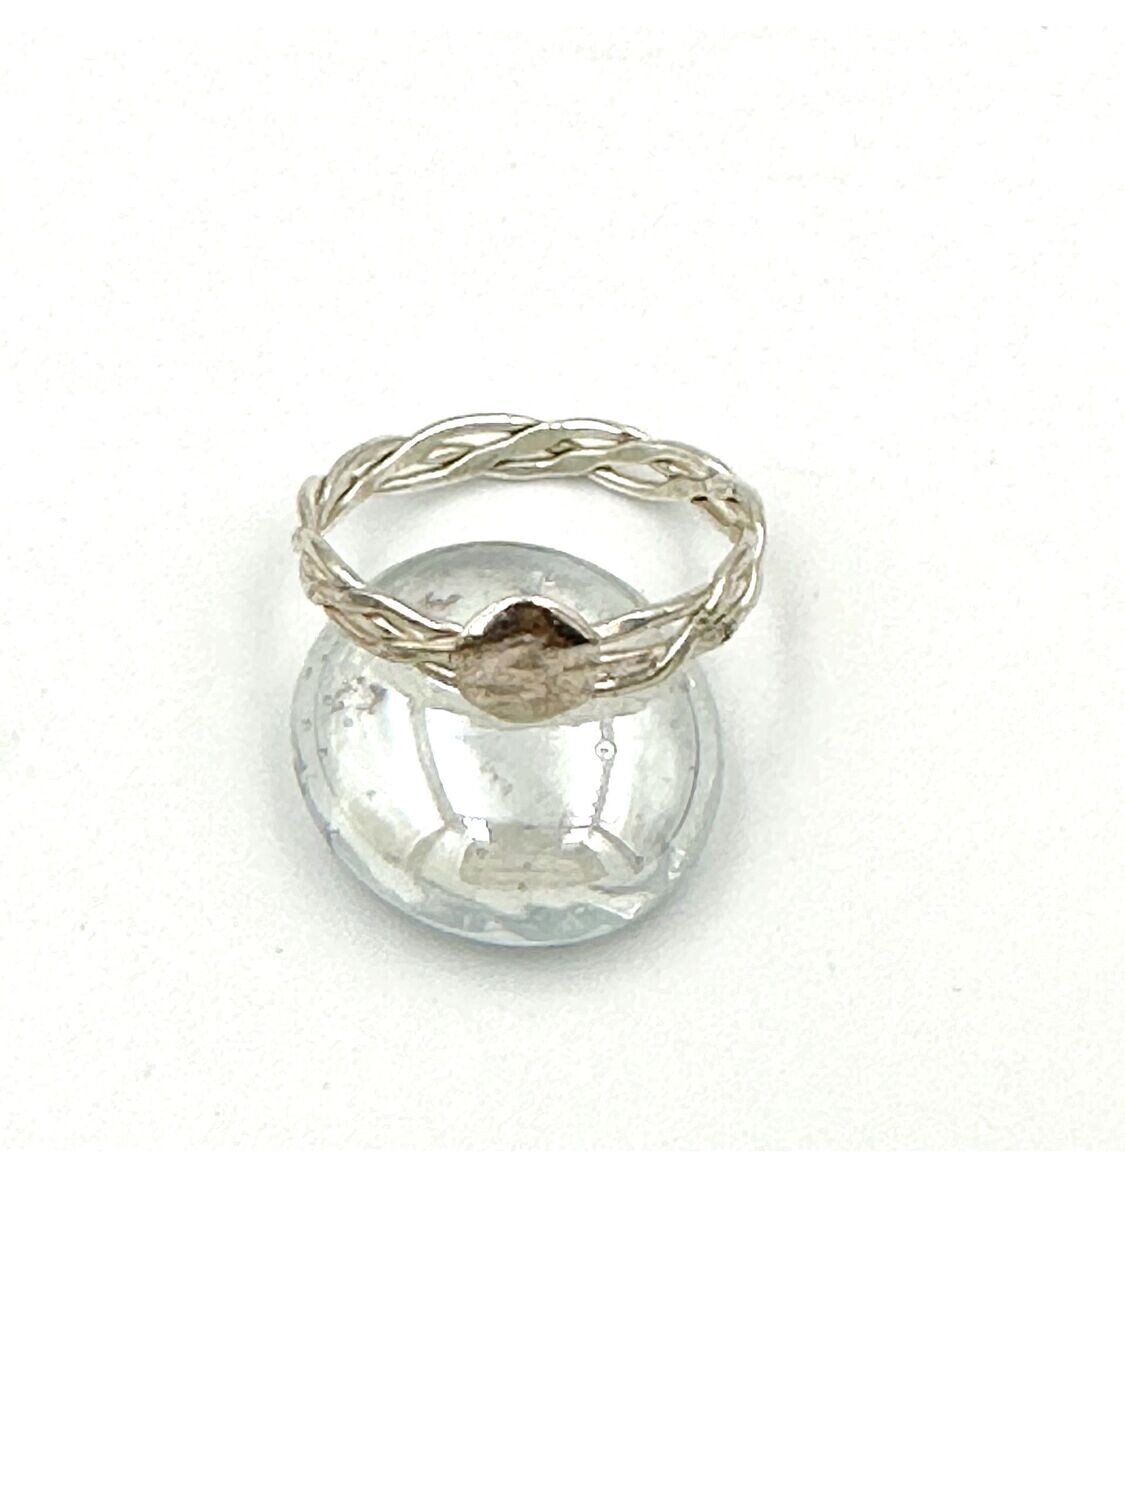 Twisted wire ring with circle accent